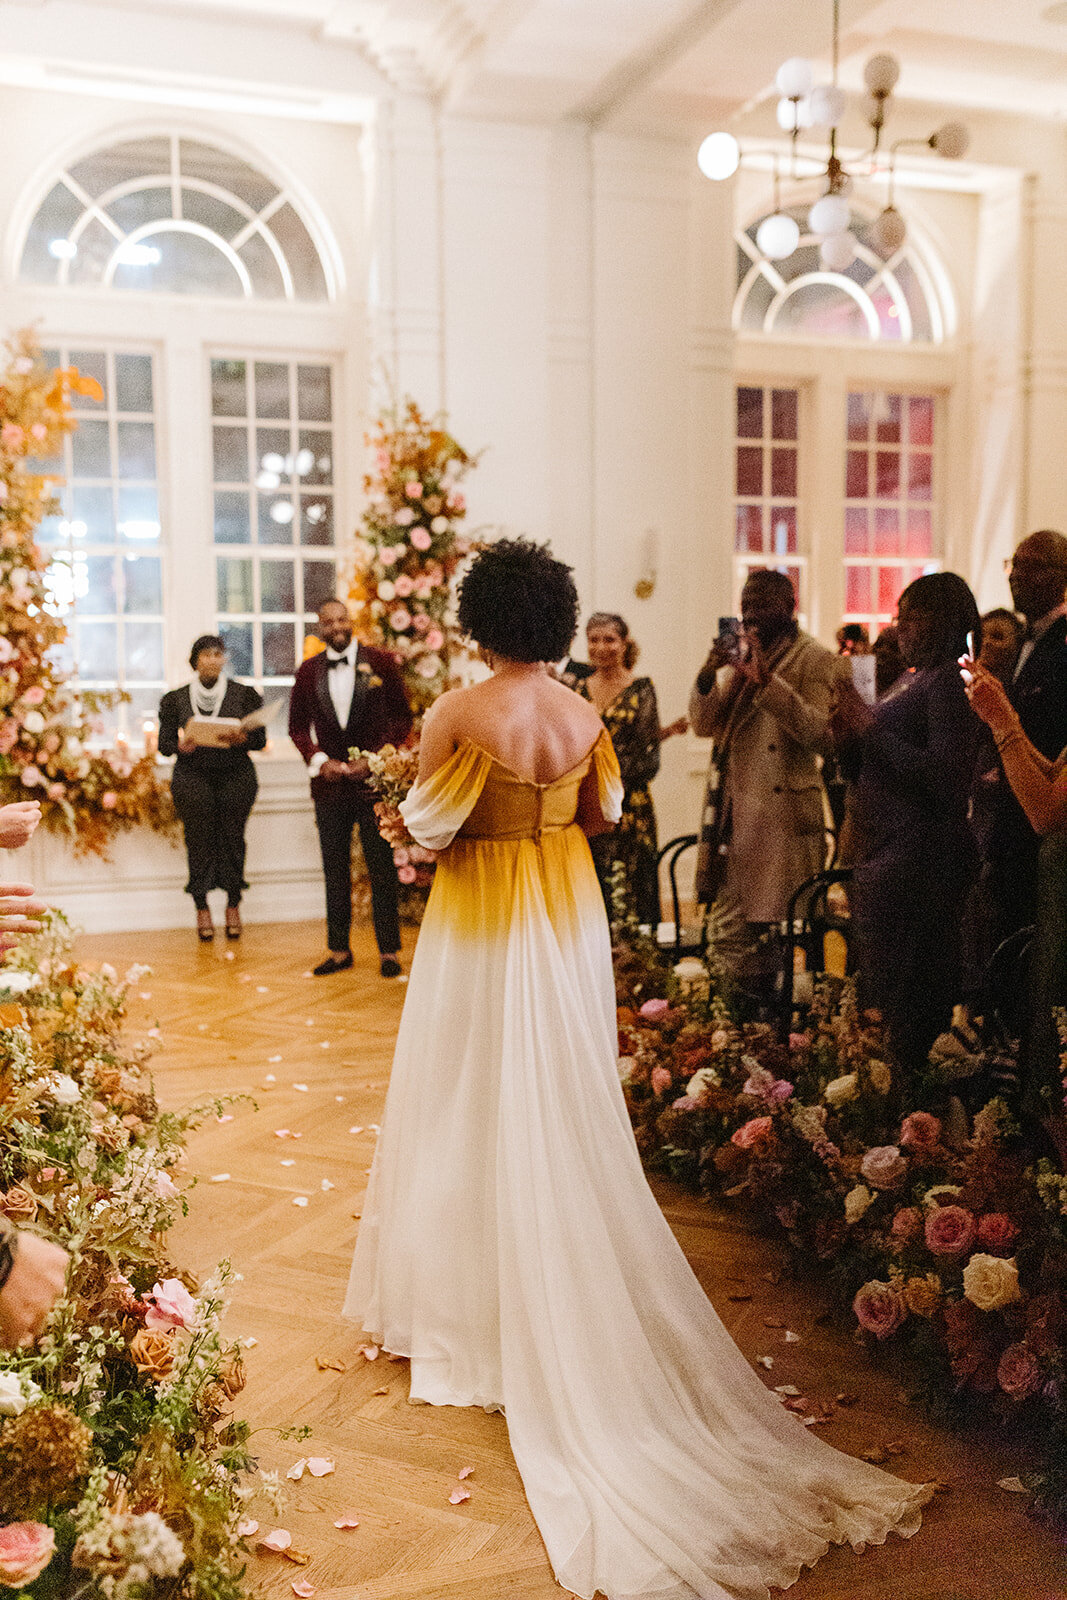 Lush aisle hedges line the entryway for this autumnal wedding with florals composed of roses, clematis, mums, delphinium, copper beech, and fall foliage creating hues of burgundy, dusty rose, copper, mauve, taupe, and lavender. Design by Rosemary and Finch in Nashville, TN.